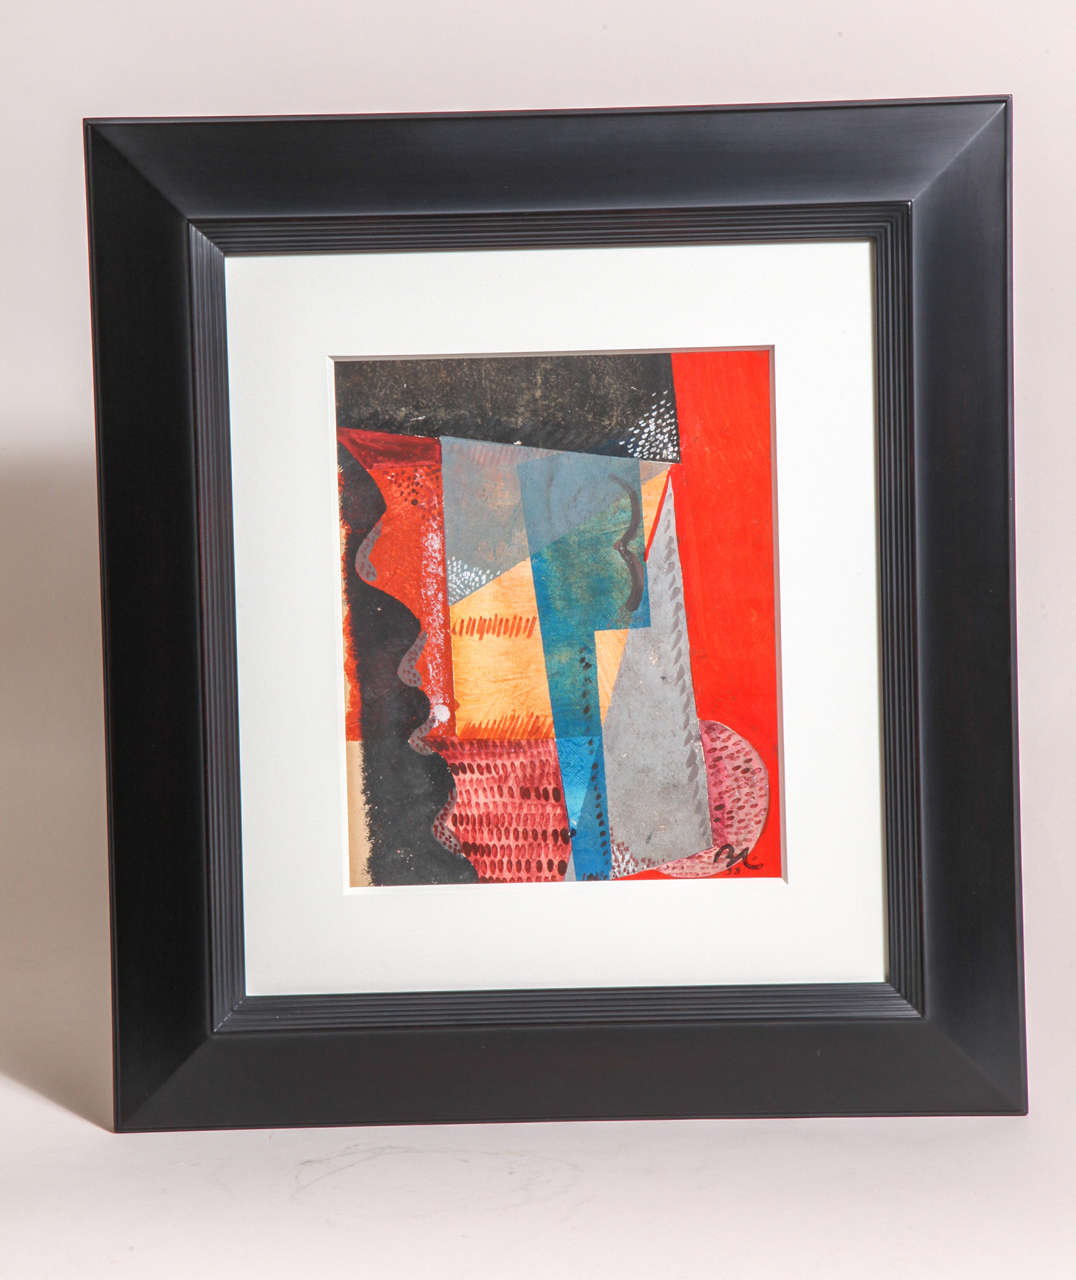 Custom framed with mat and museum glass
With cubist abstract design
Signed BL 33

Measures: Sheet 9 3/8” wide; 11 ½” high
Framed 19 ½” wide; 21 ½” high.